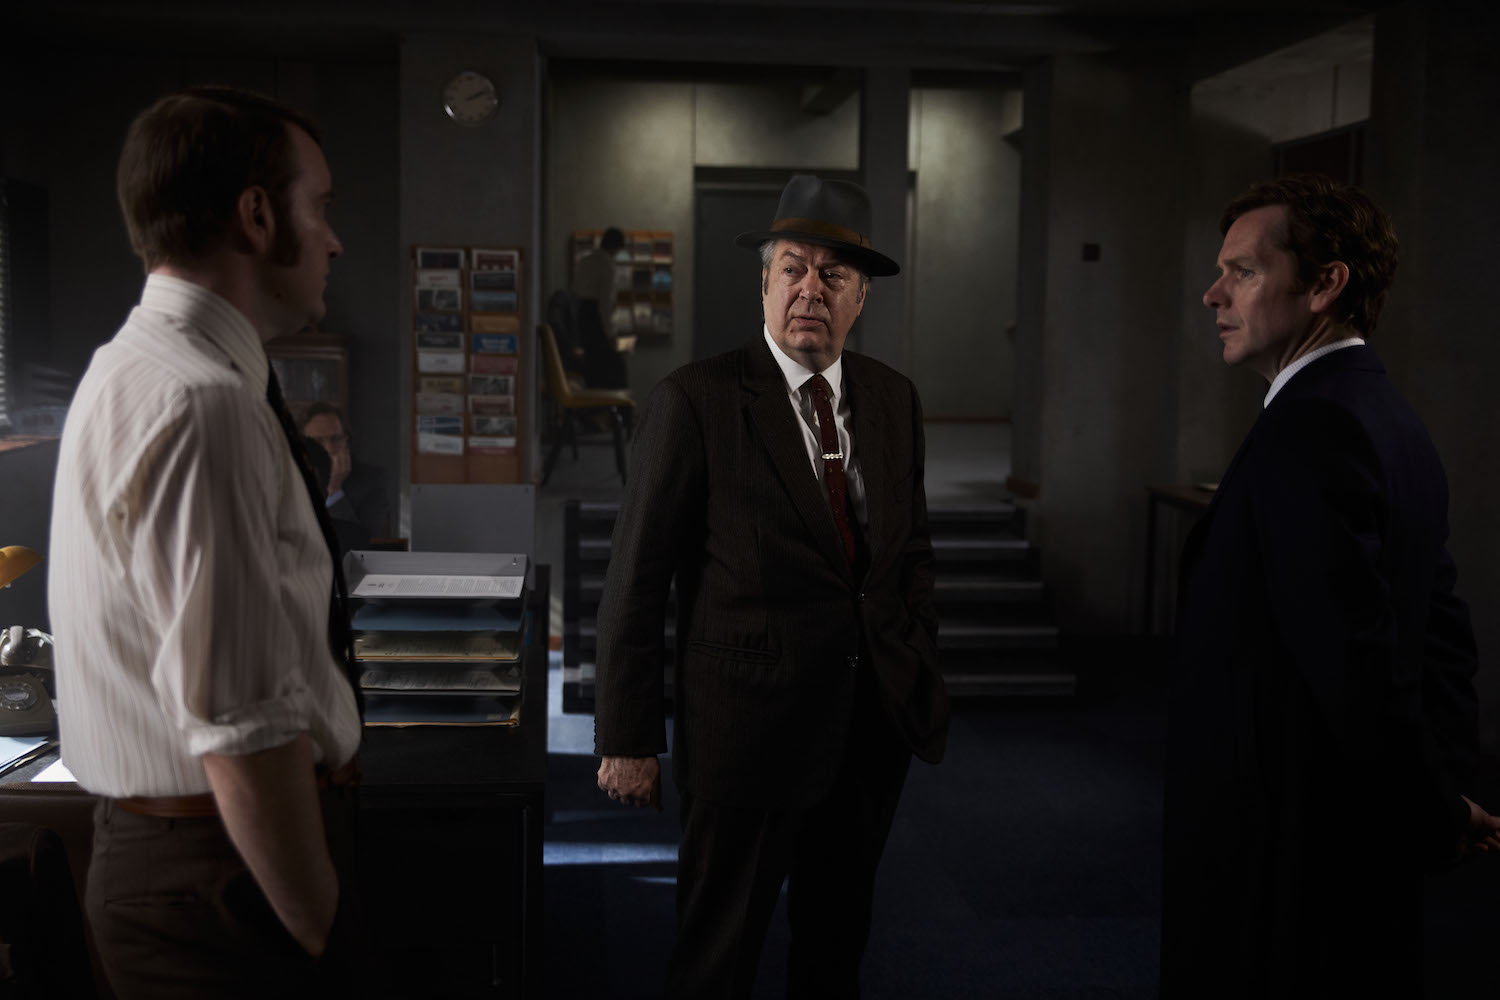 Picture shows: DS Jim Strange (Sean Rigby), DCI Fred Thursday (Roger Allam), Sgt. Endeavour Morse (Sean Evans) in the office.